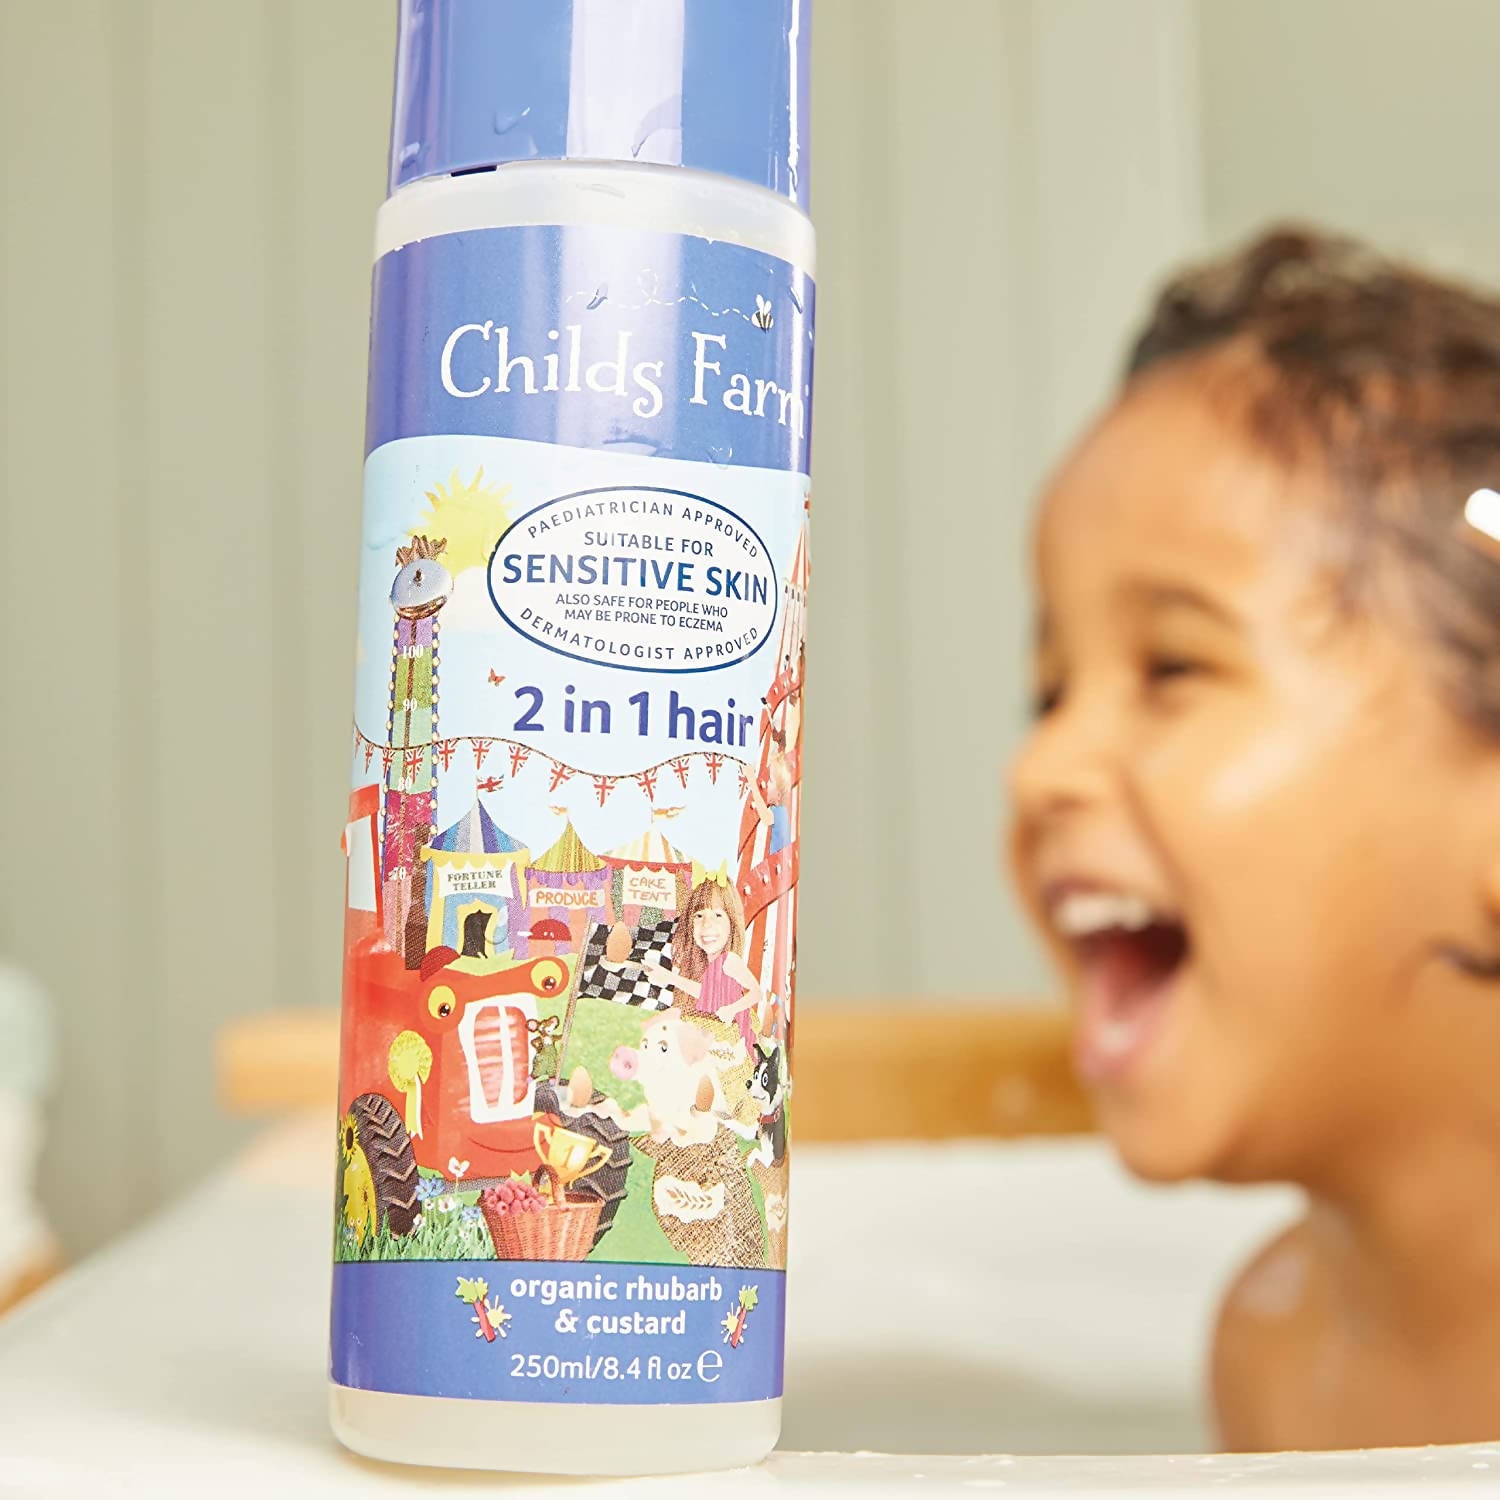 Childs Farm 2 in 1 Organic Rhubarb and Custard Shampoo and Conditionner 250ml